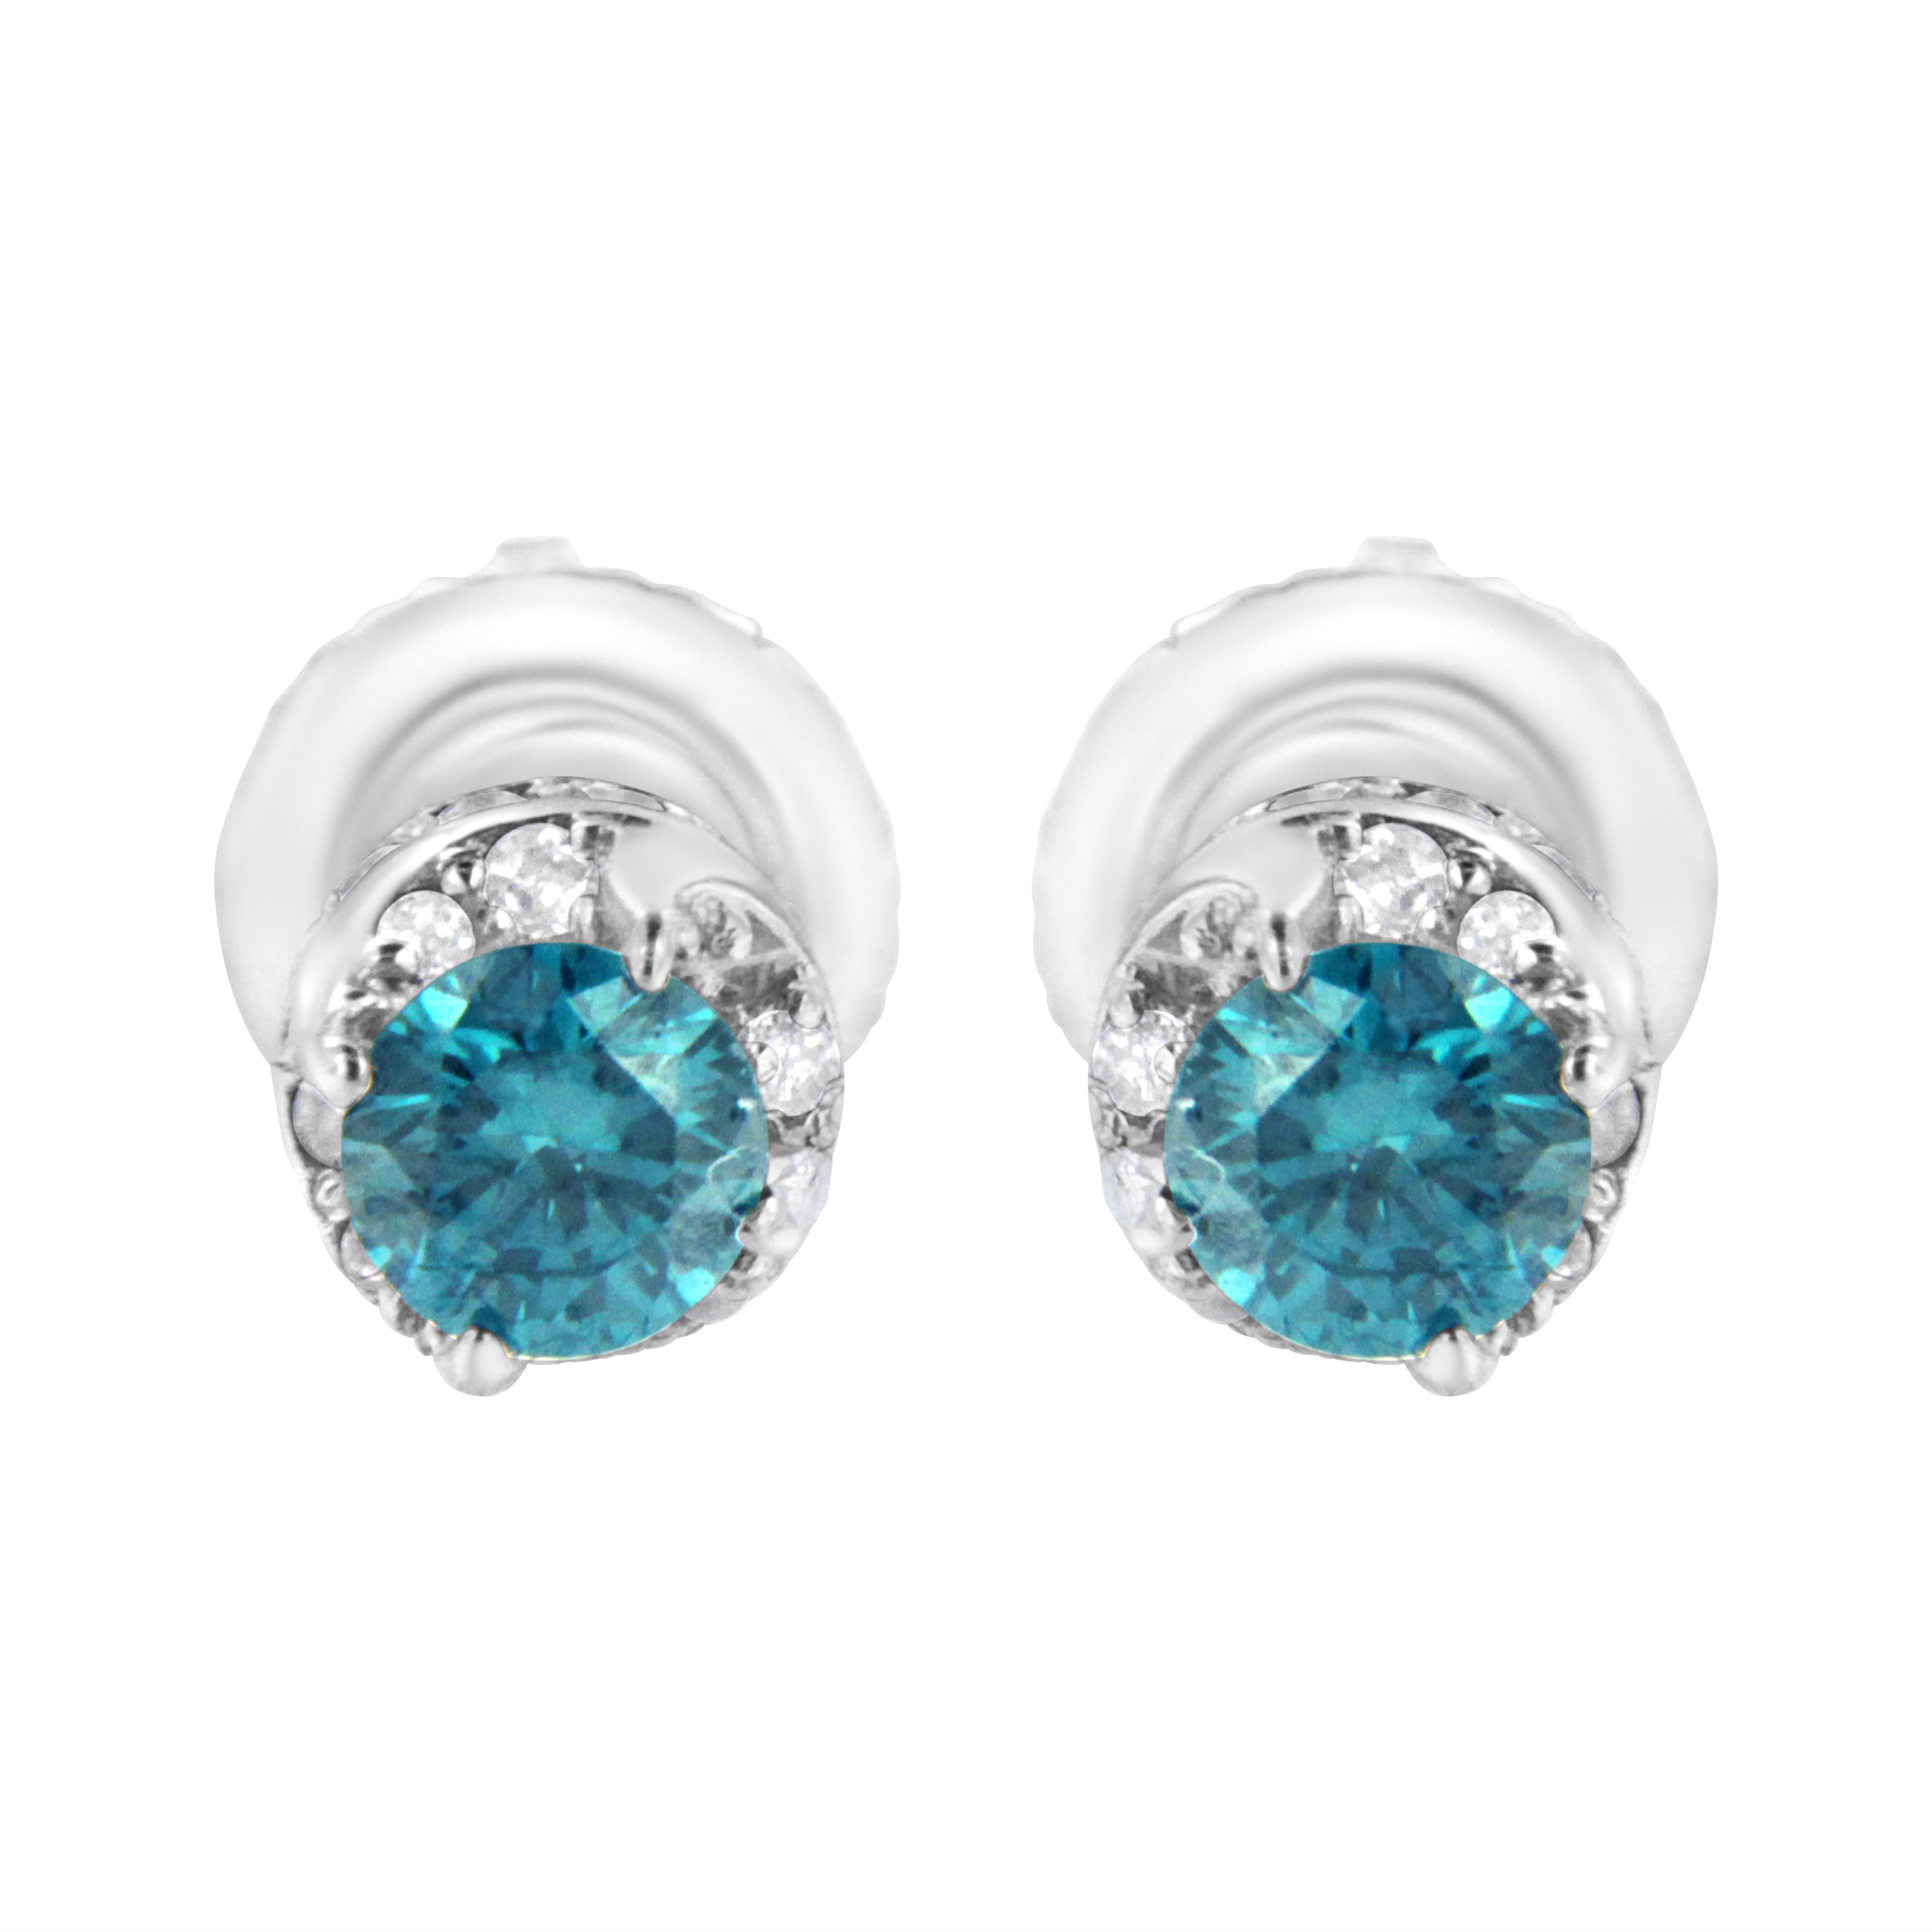 Modern 14k White Gold 1/2 Carat White and Treated Blue Round Diamond Earrings For Sale